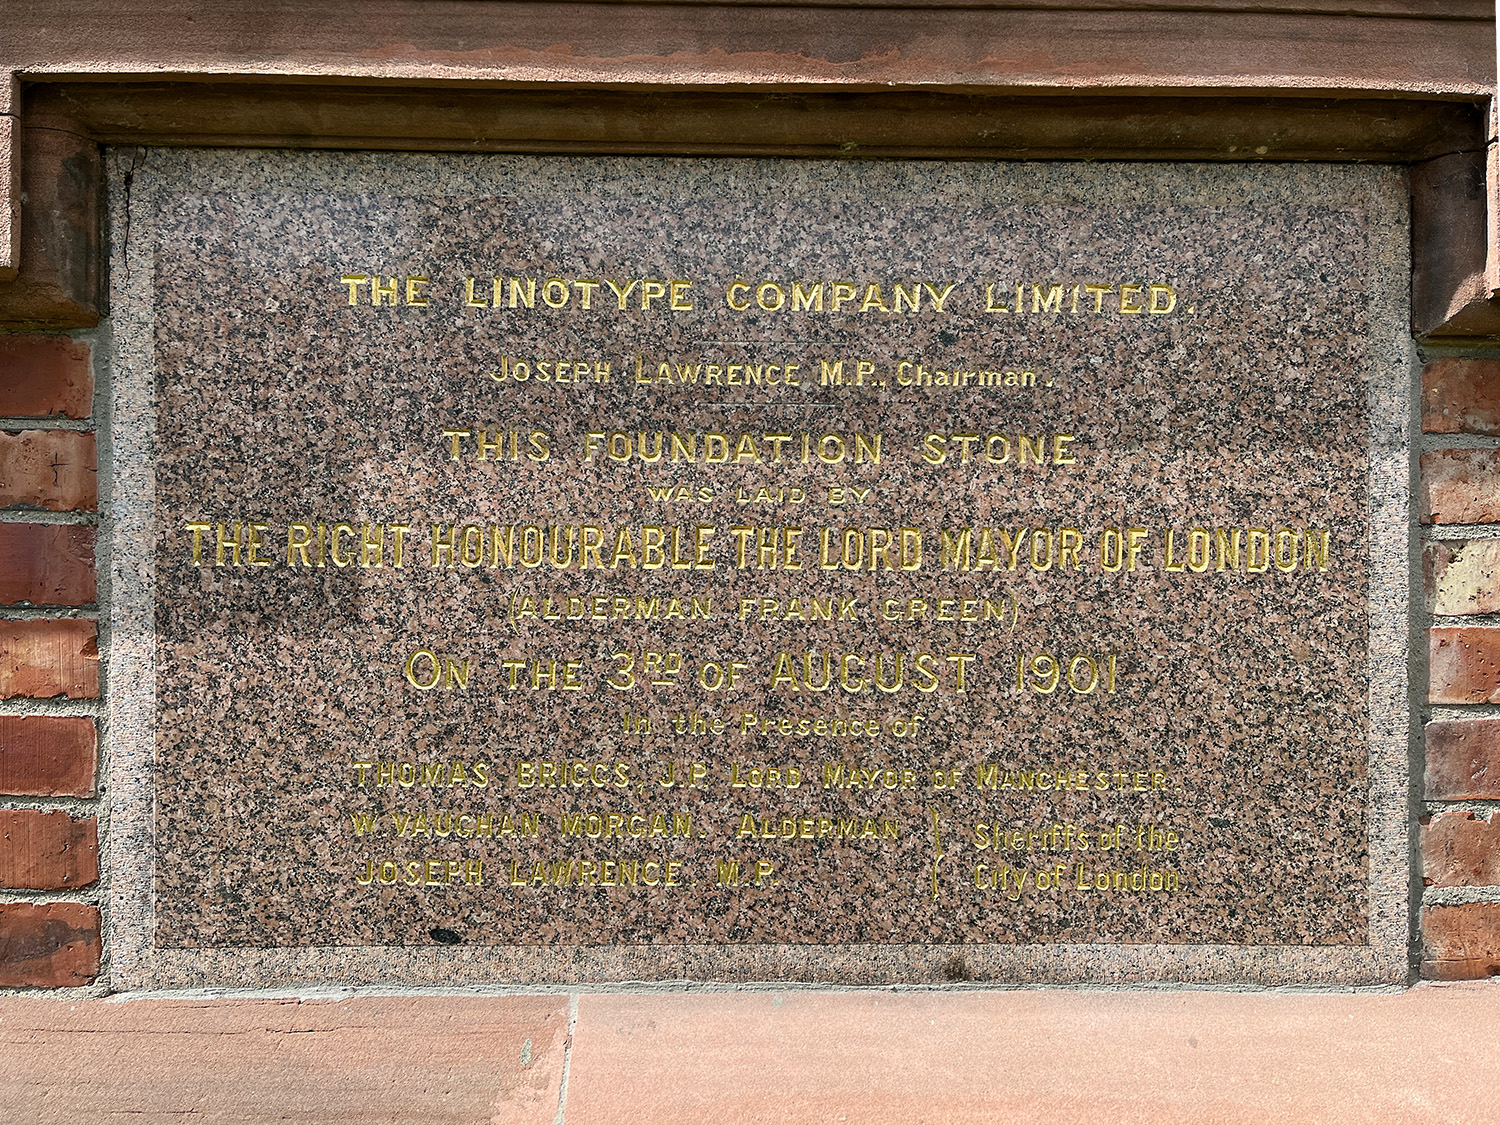 The cornerstone of the building.